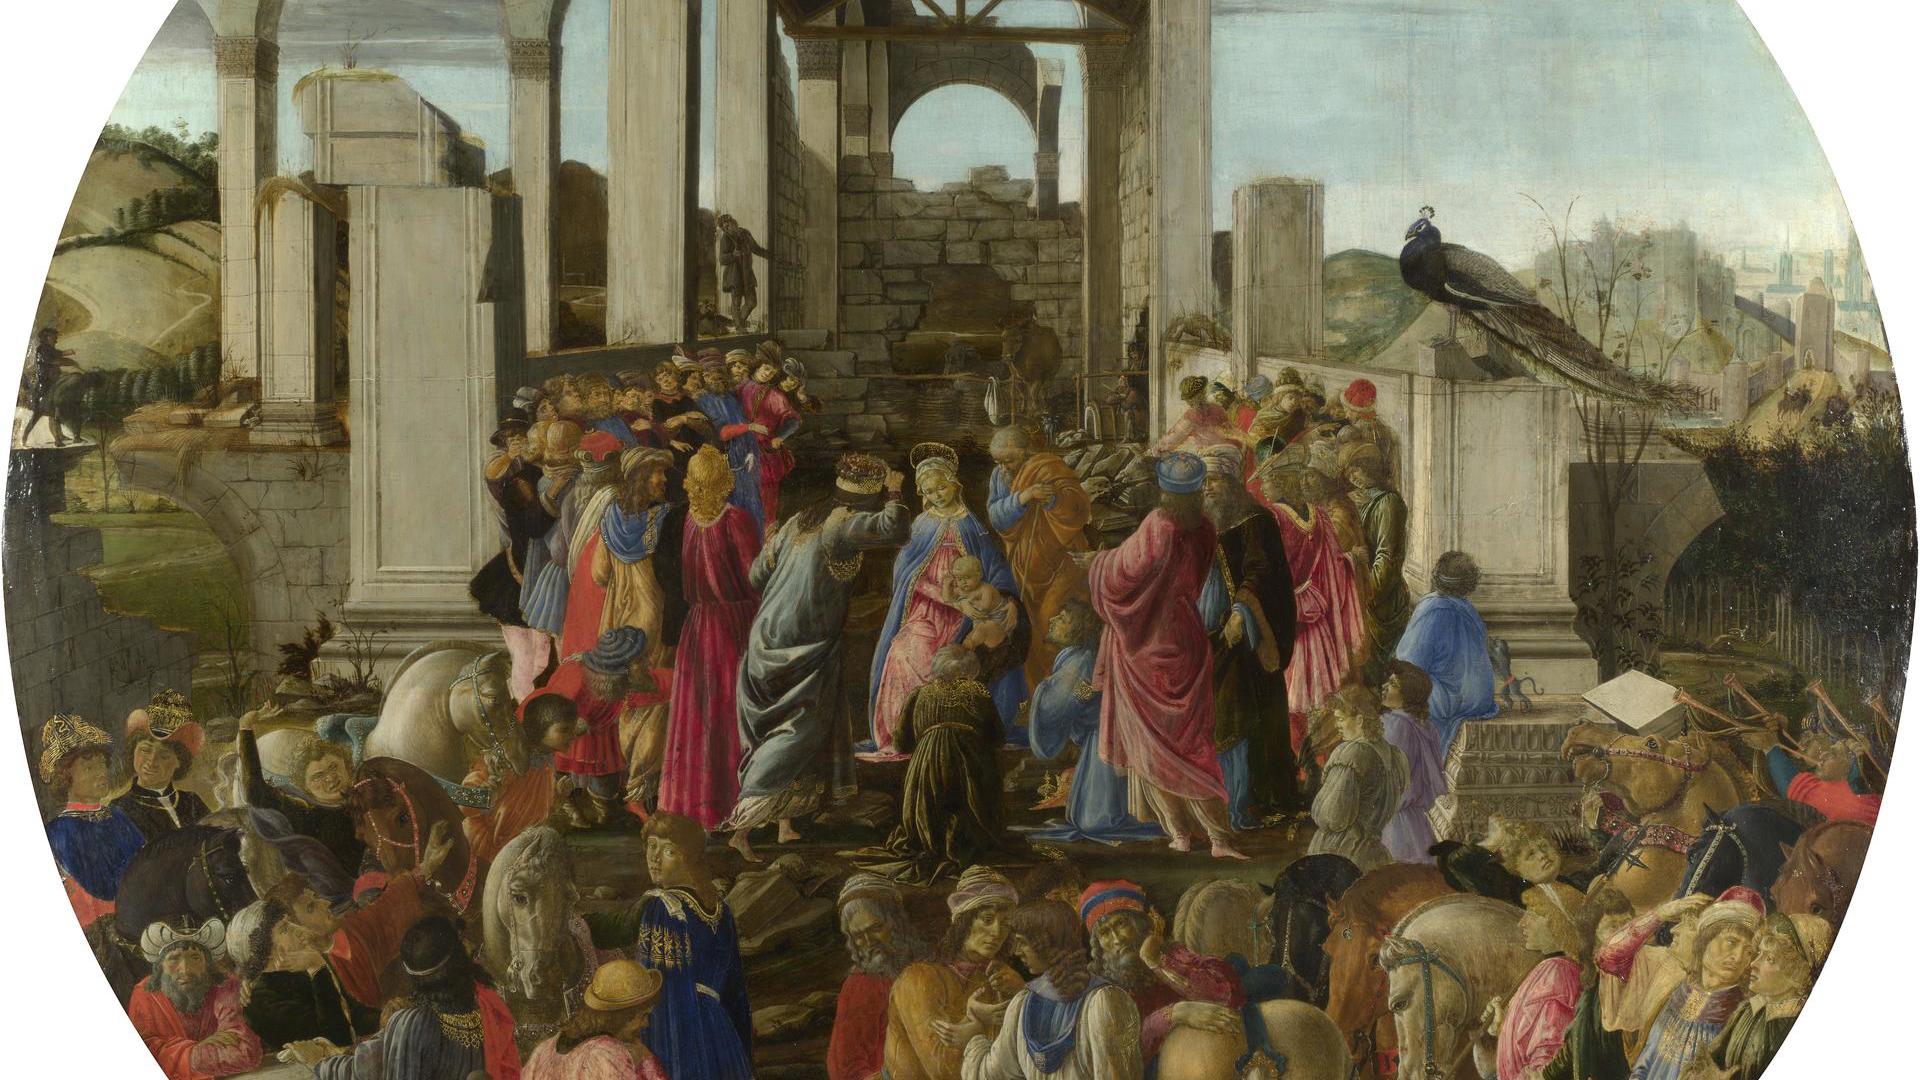 The Adoration of the Kings by Sandro Botticelli